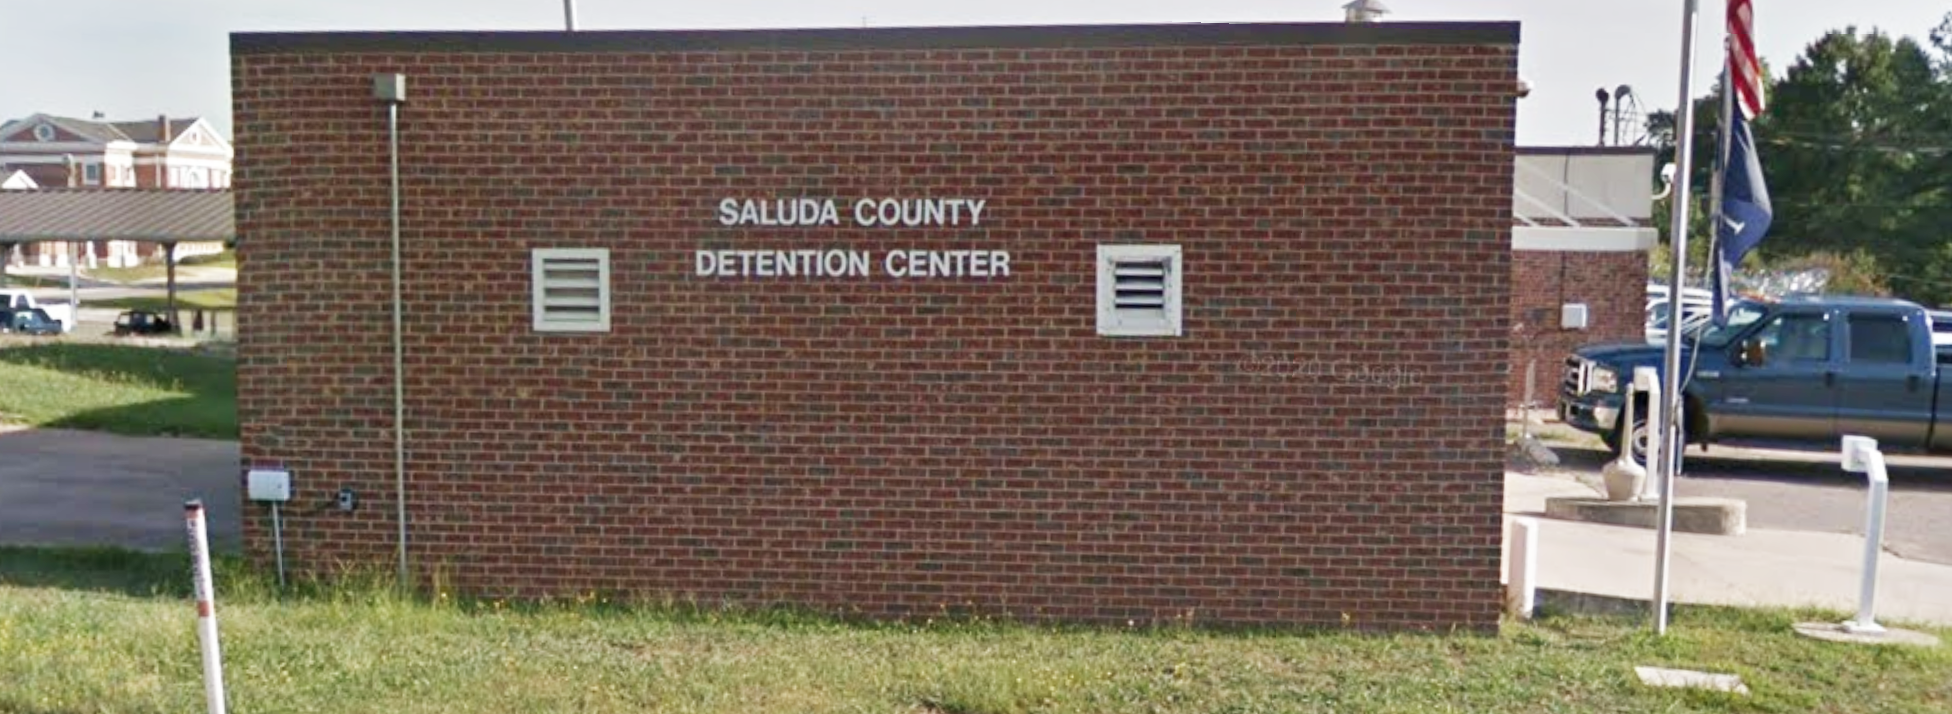 Inmate Commissary Care Packs Saluda County Detention Center SC